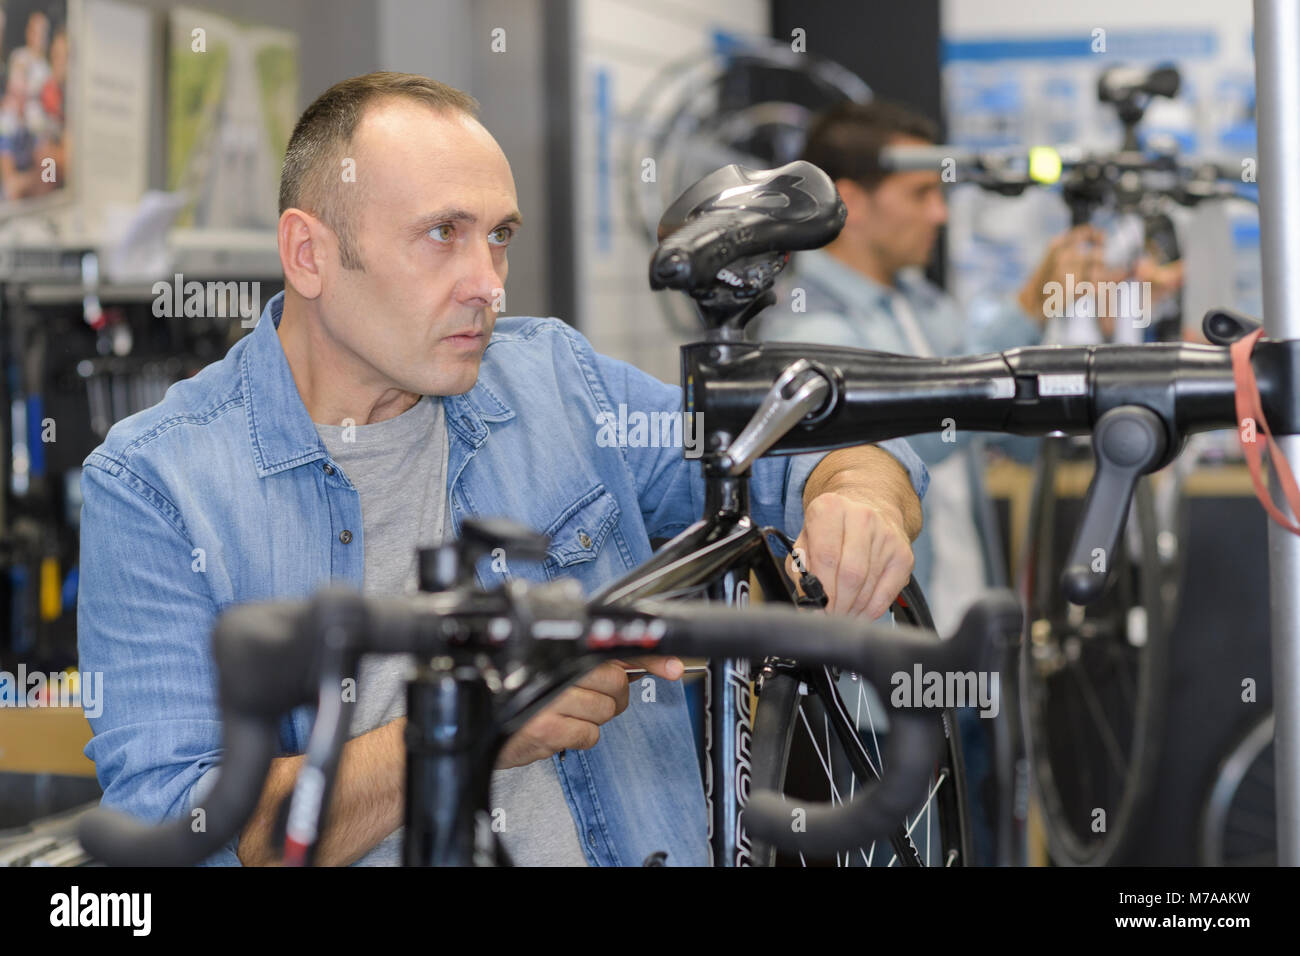 man checks a bike before buying in the sports shop Stock Photo